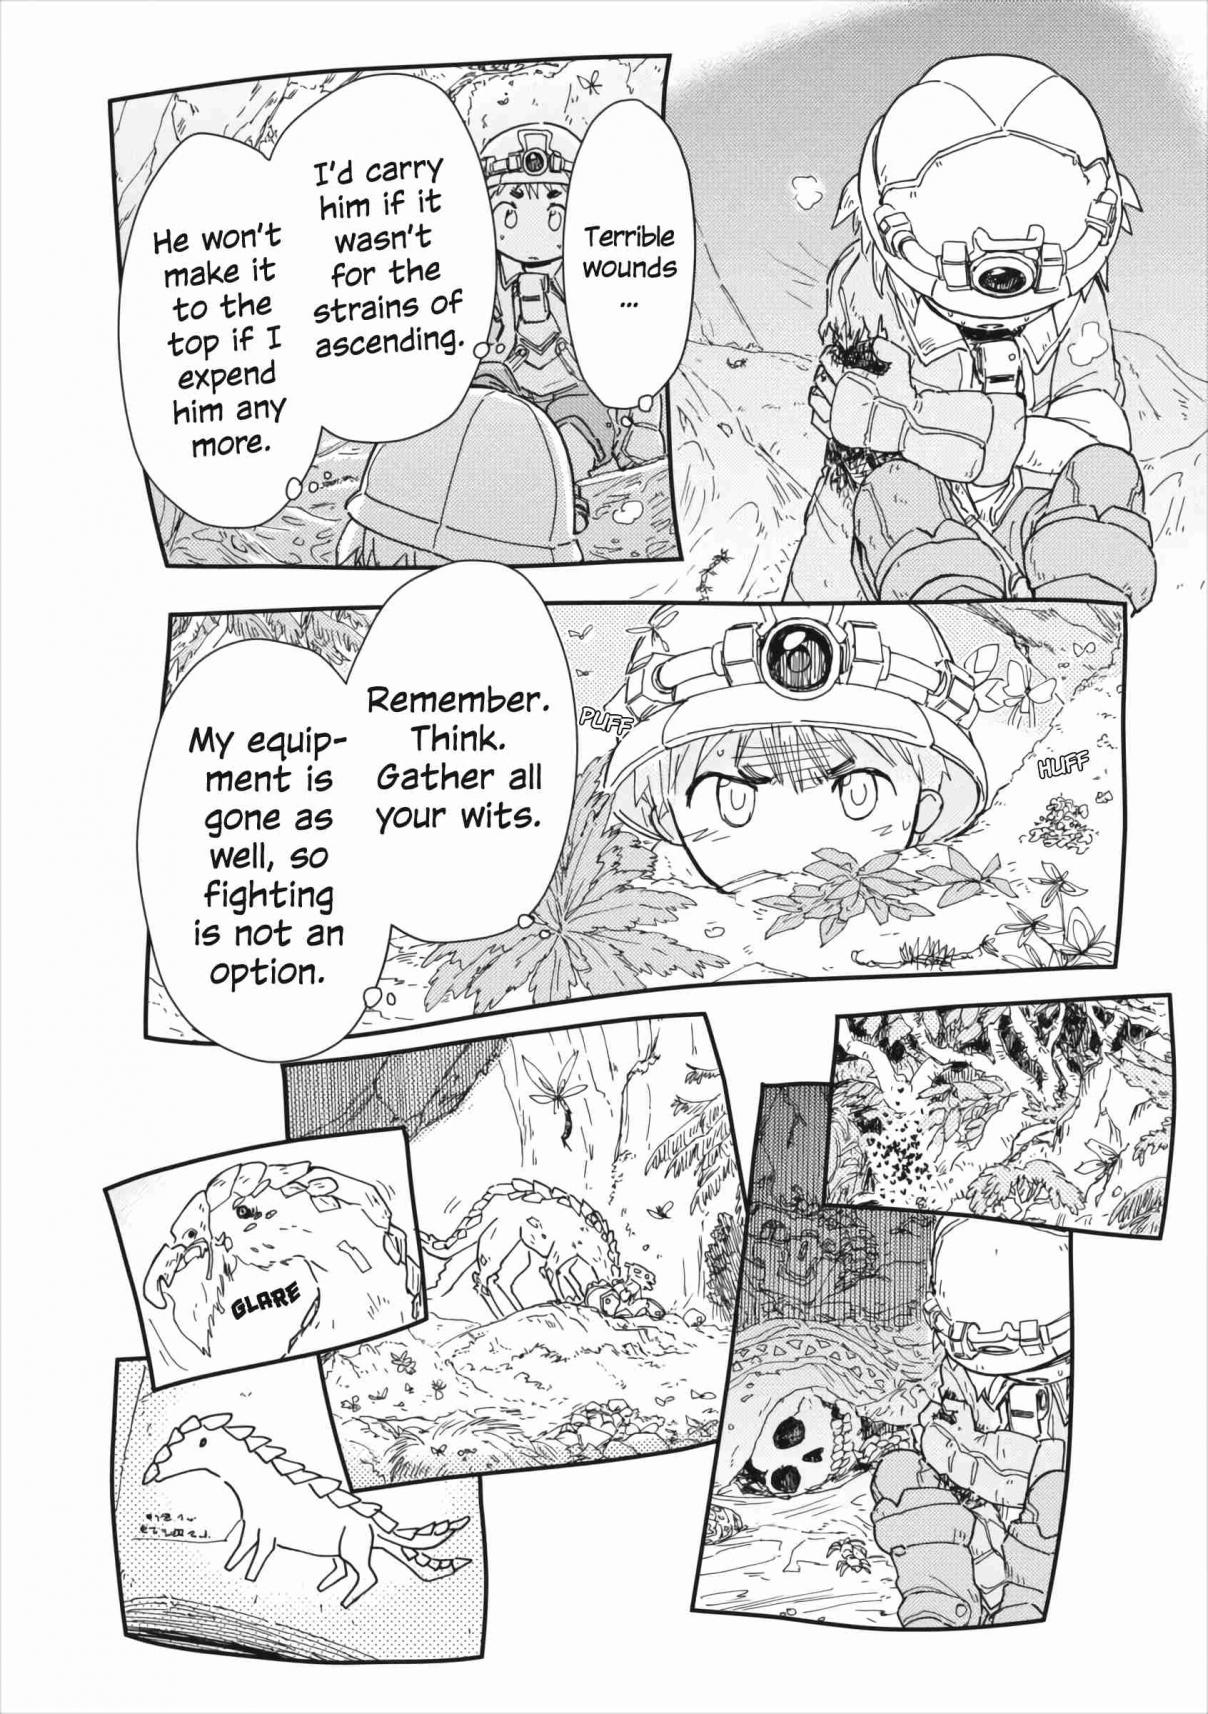 Made in Abyss Anthology Vol. 2 Ch. 6 Heartpounding! Riko's Creature of the Day (Imai Tetsuya)